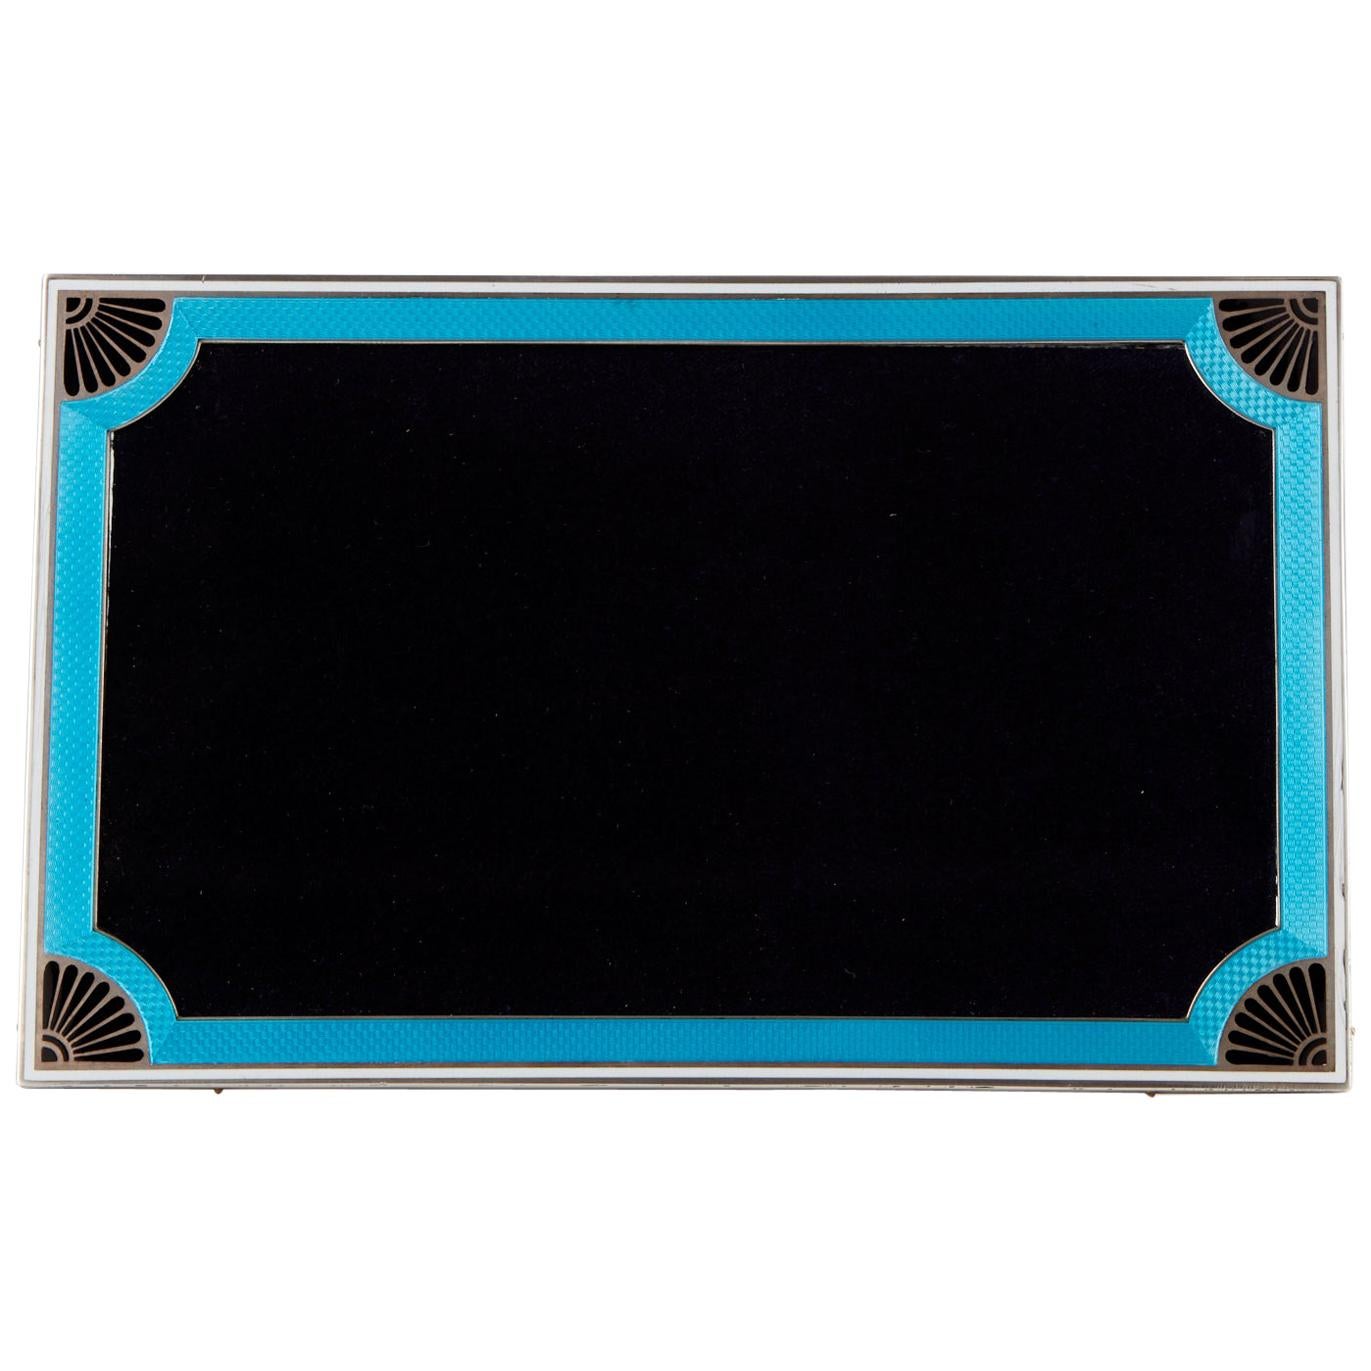 Antique 20th Century Art Deco Silver & Enamel Photograph Frame, circa 1920.

A beautiful heavy cast silver, pure art deco picture frame with applied two colour guilloche enamel.
The underlying colour is aqua marine with applied black enamel